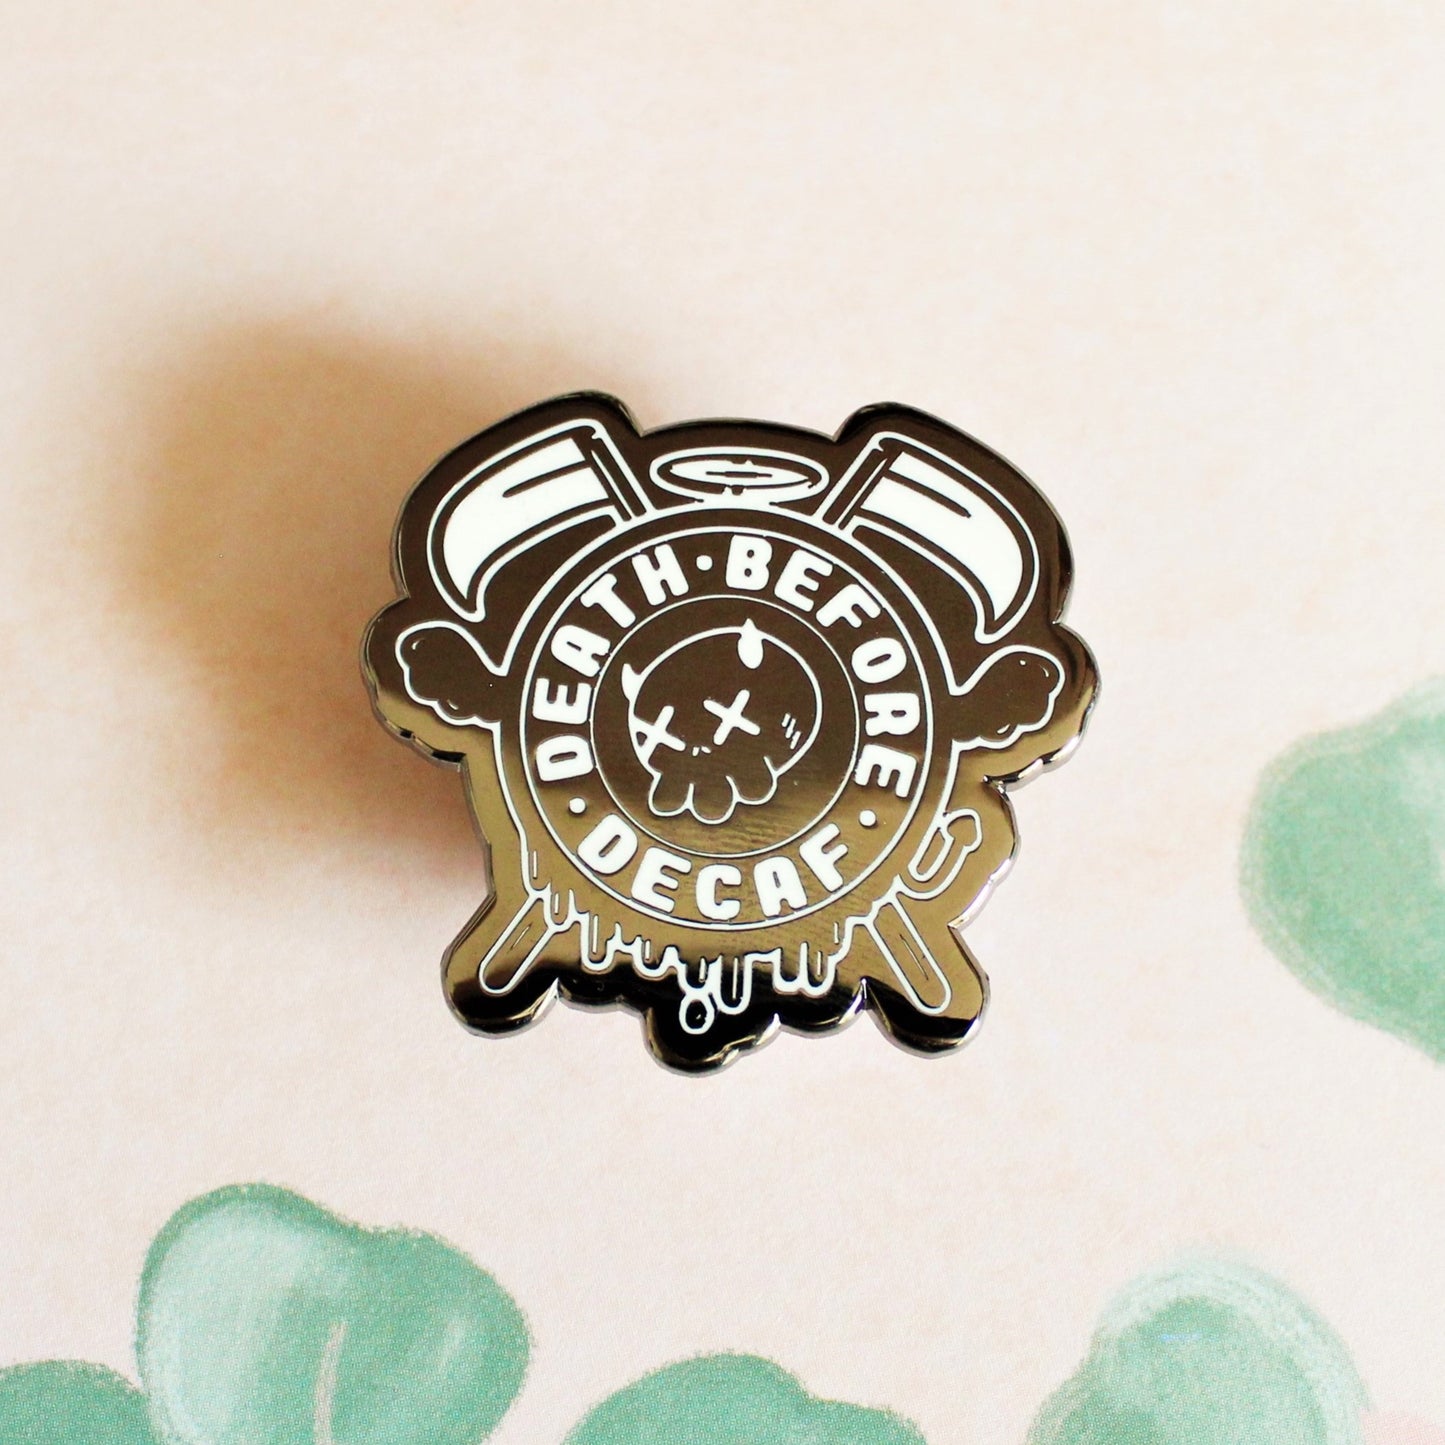 Death Before Decaf Enamel Pin. Coffee Lover Gift. Barista Life Lapel Pin. Skeleton Coffee Addict Hat Pin. Caffeine or Die Accessory.